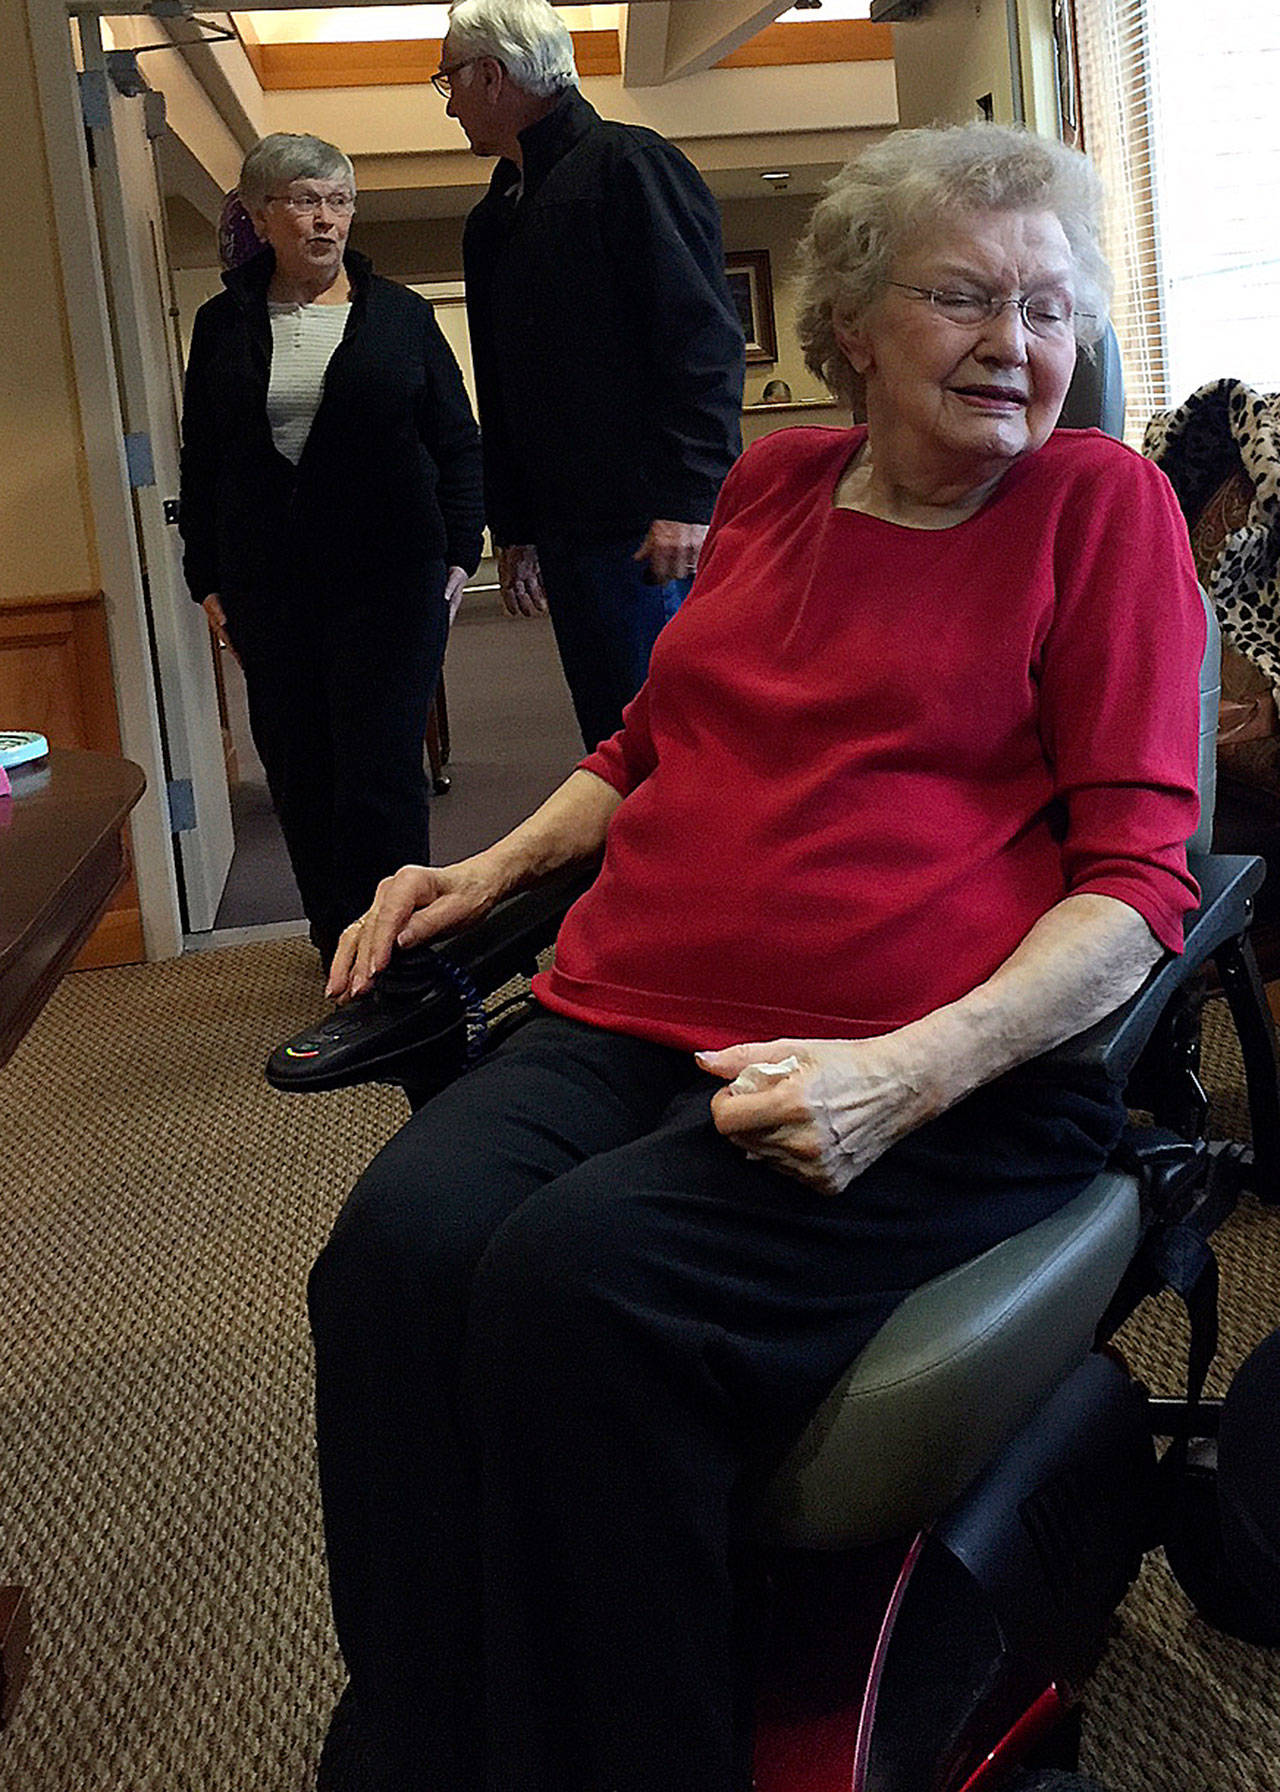 Dee Moschel, who turned 90 on Jan. 23, is a lifetime honorary member of the Kent Downtown Partnership. COURTESY PHOTO, KDP